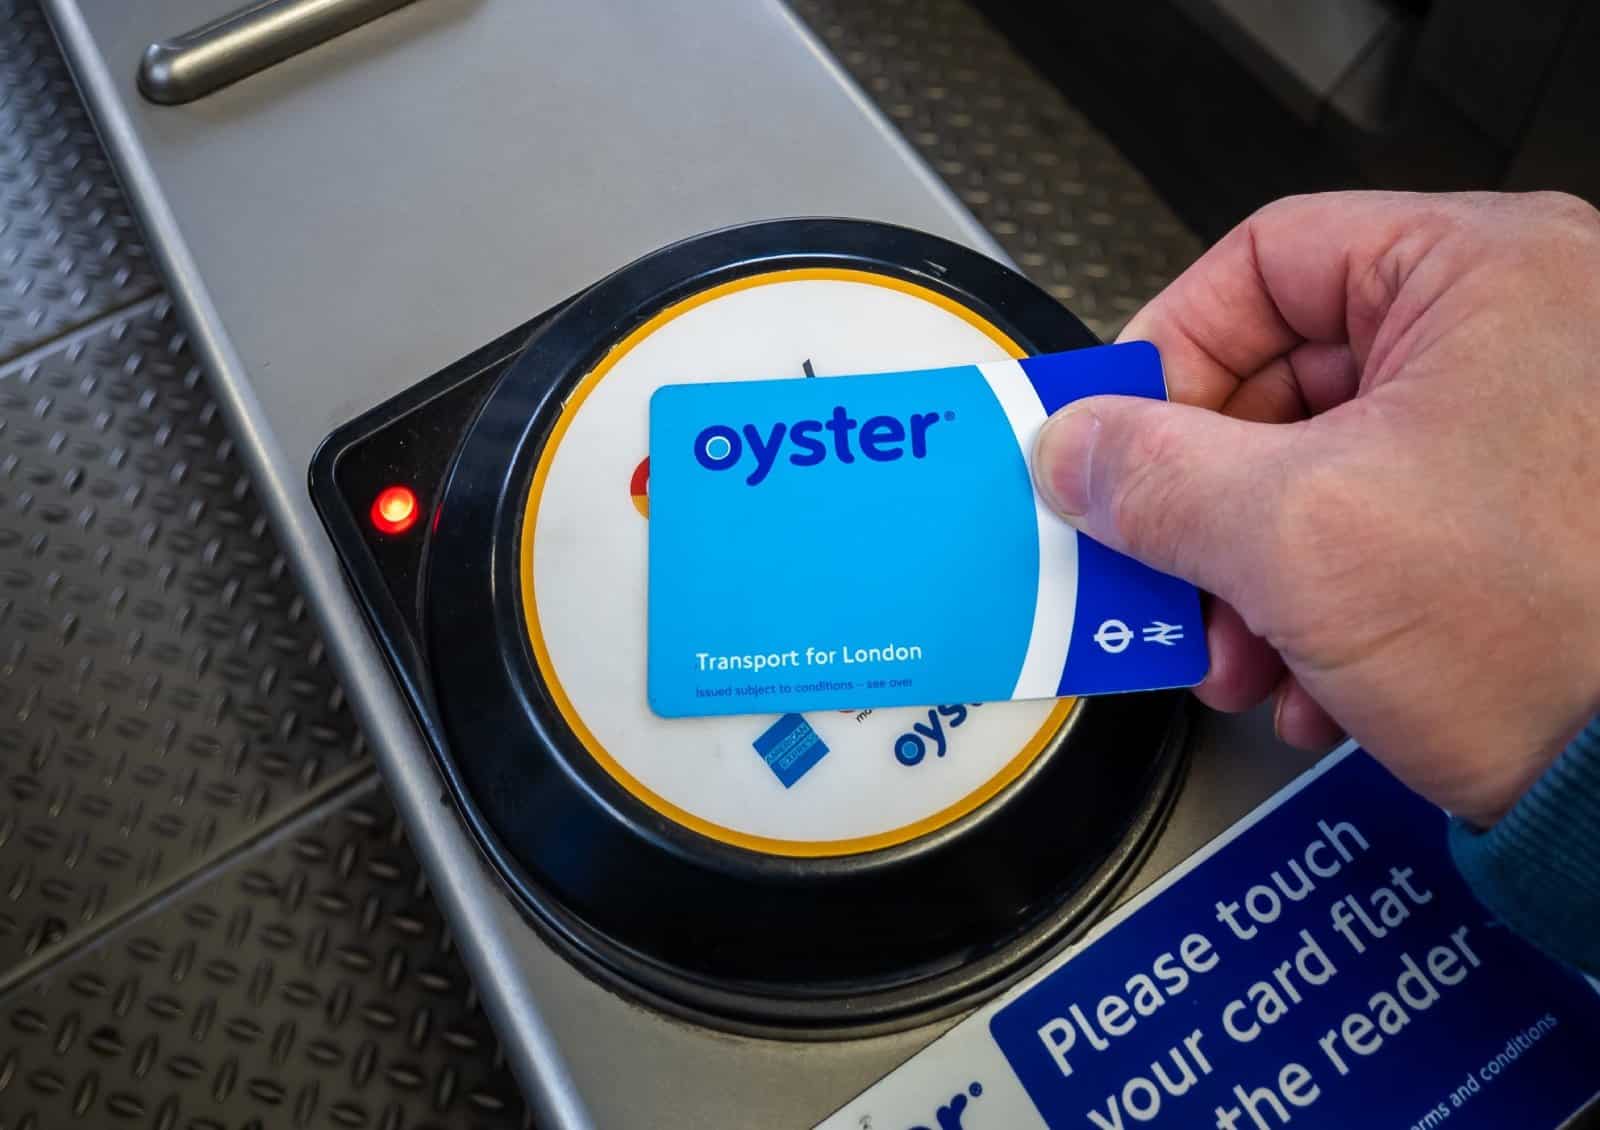 Image Credit: Shutterstock / Yau Ming Low <p>The barrier at the Tube station won’t budge, and you realize your Oyster Card is sitting on the kitchen table. The queue forming behind you is a silent tribunal of judgement.</p>